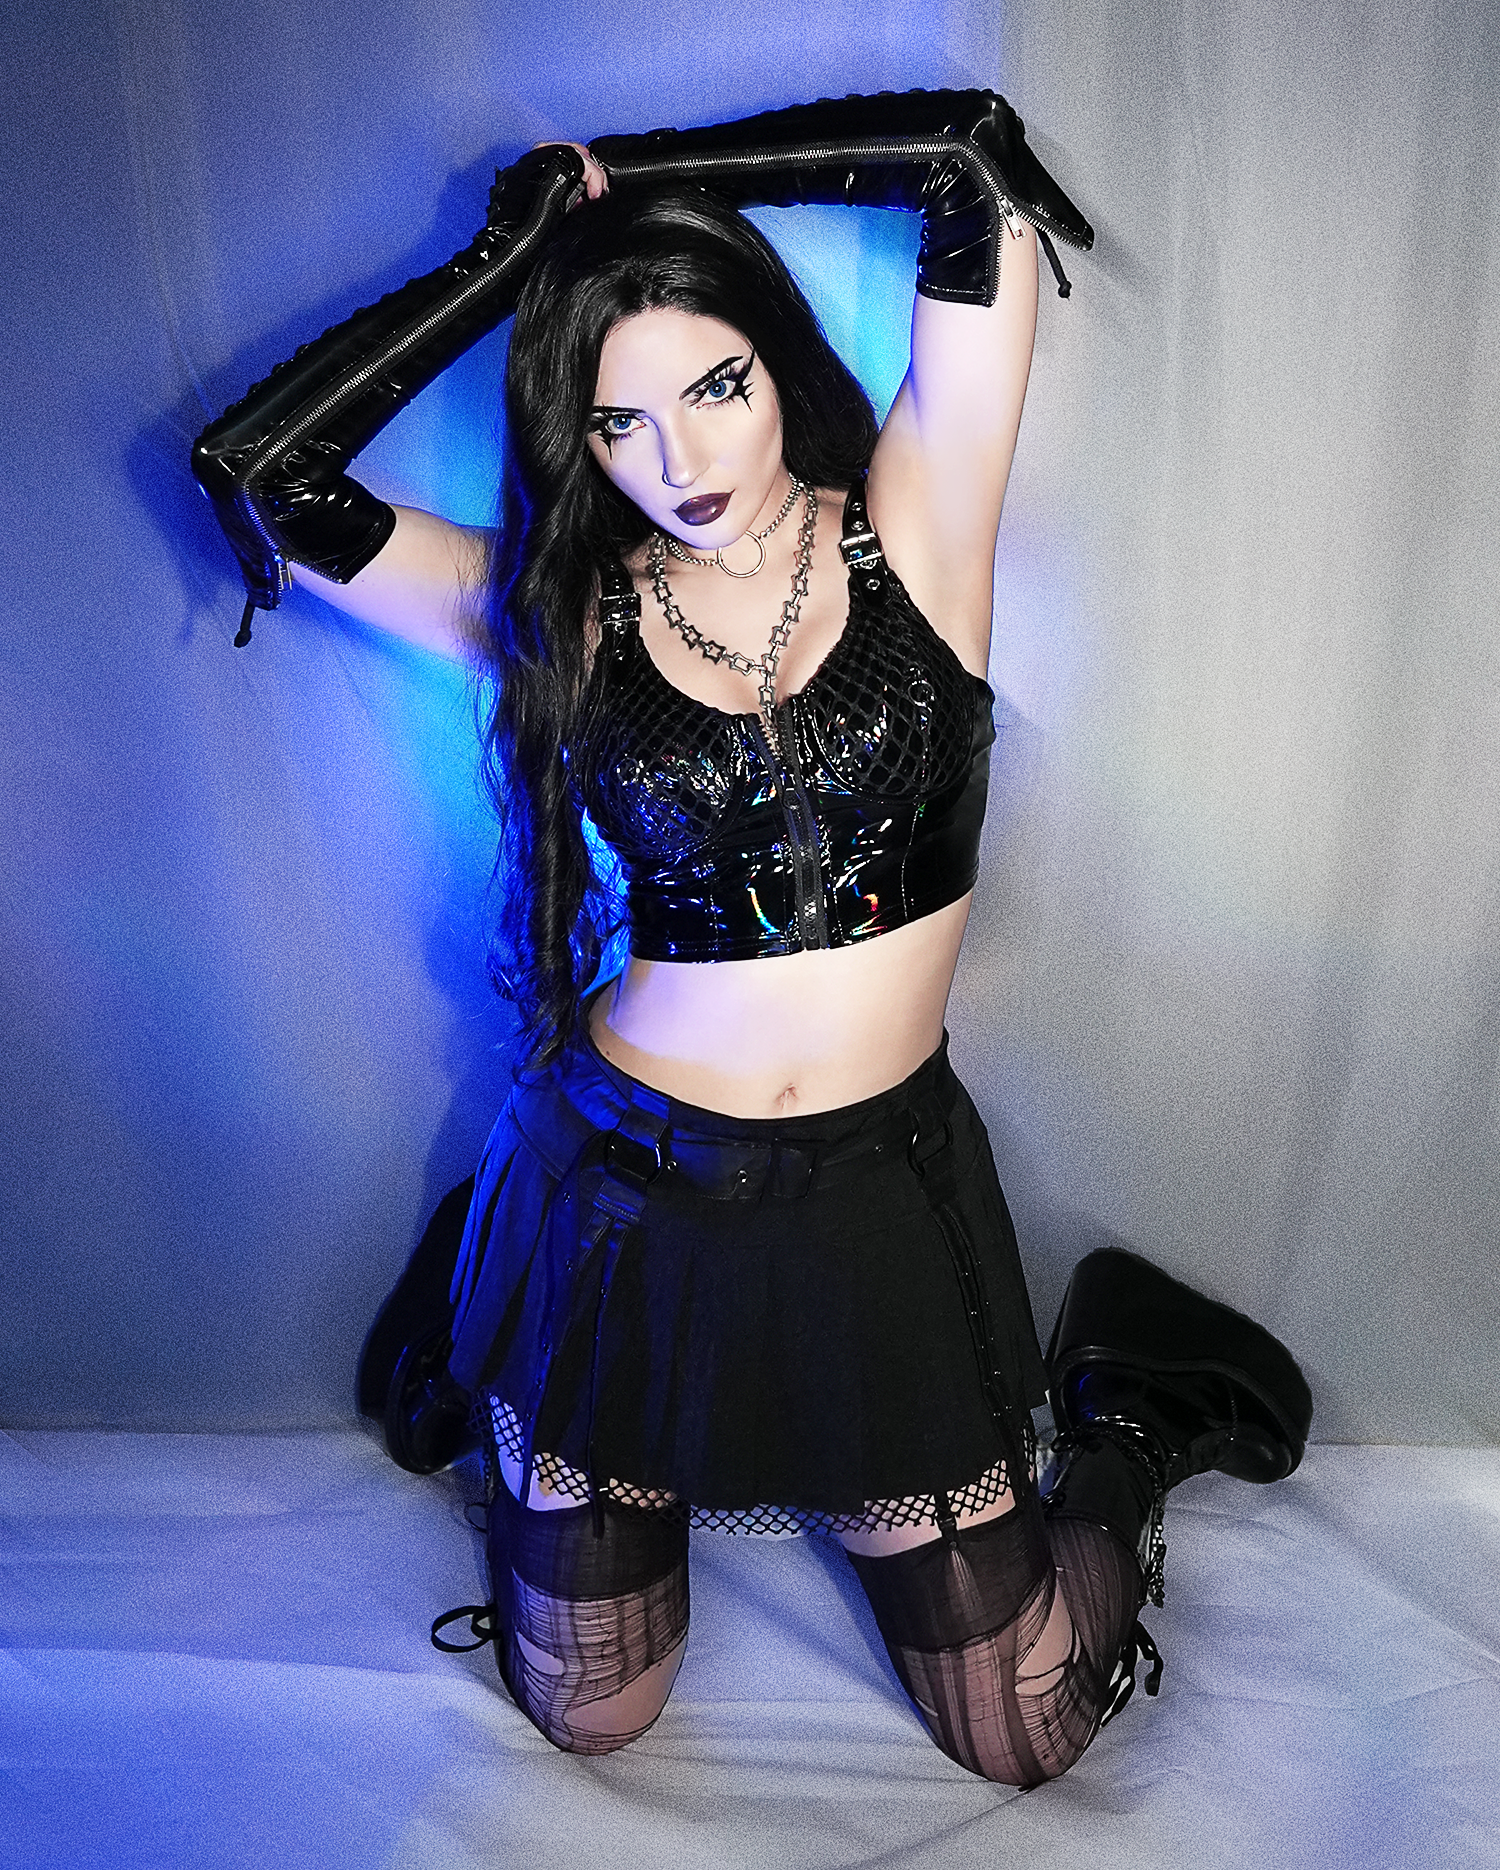 which pic is your fav 1-5? 🖤 having fun inside while it’s been storming in CA the past week⚡️

Outfit:
🖤 Top, skirt, and nails from @shasilo_clothing
🖤 Necklaces from @regalrose
🖤 Shoes from @demonia.shoes

🖤⛓️
#gothgirl #gothoutfit #gothaesthetic #gothgf #gothdoll #gothstyle